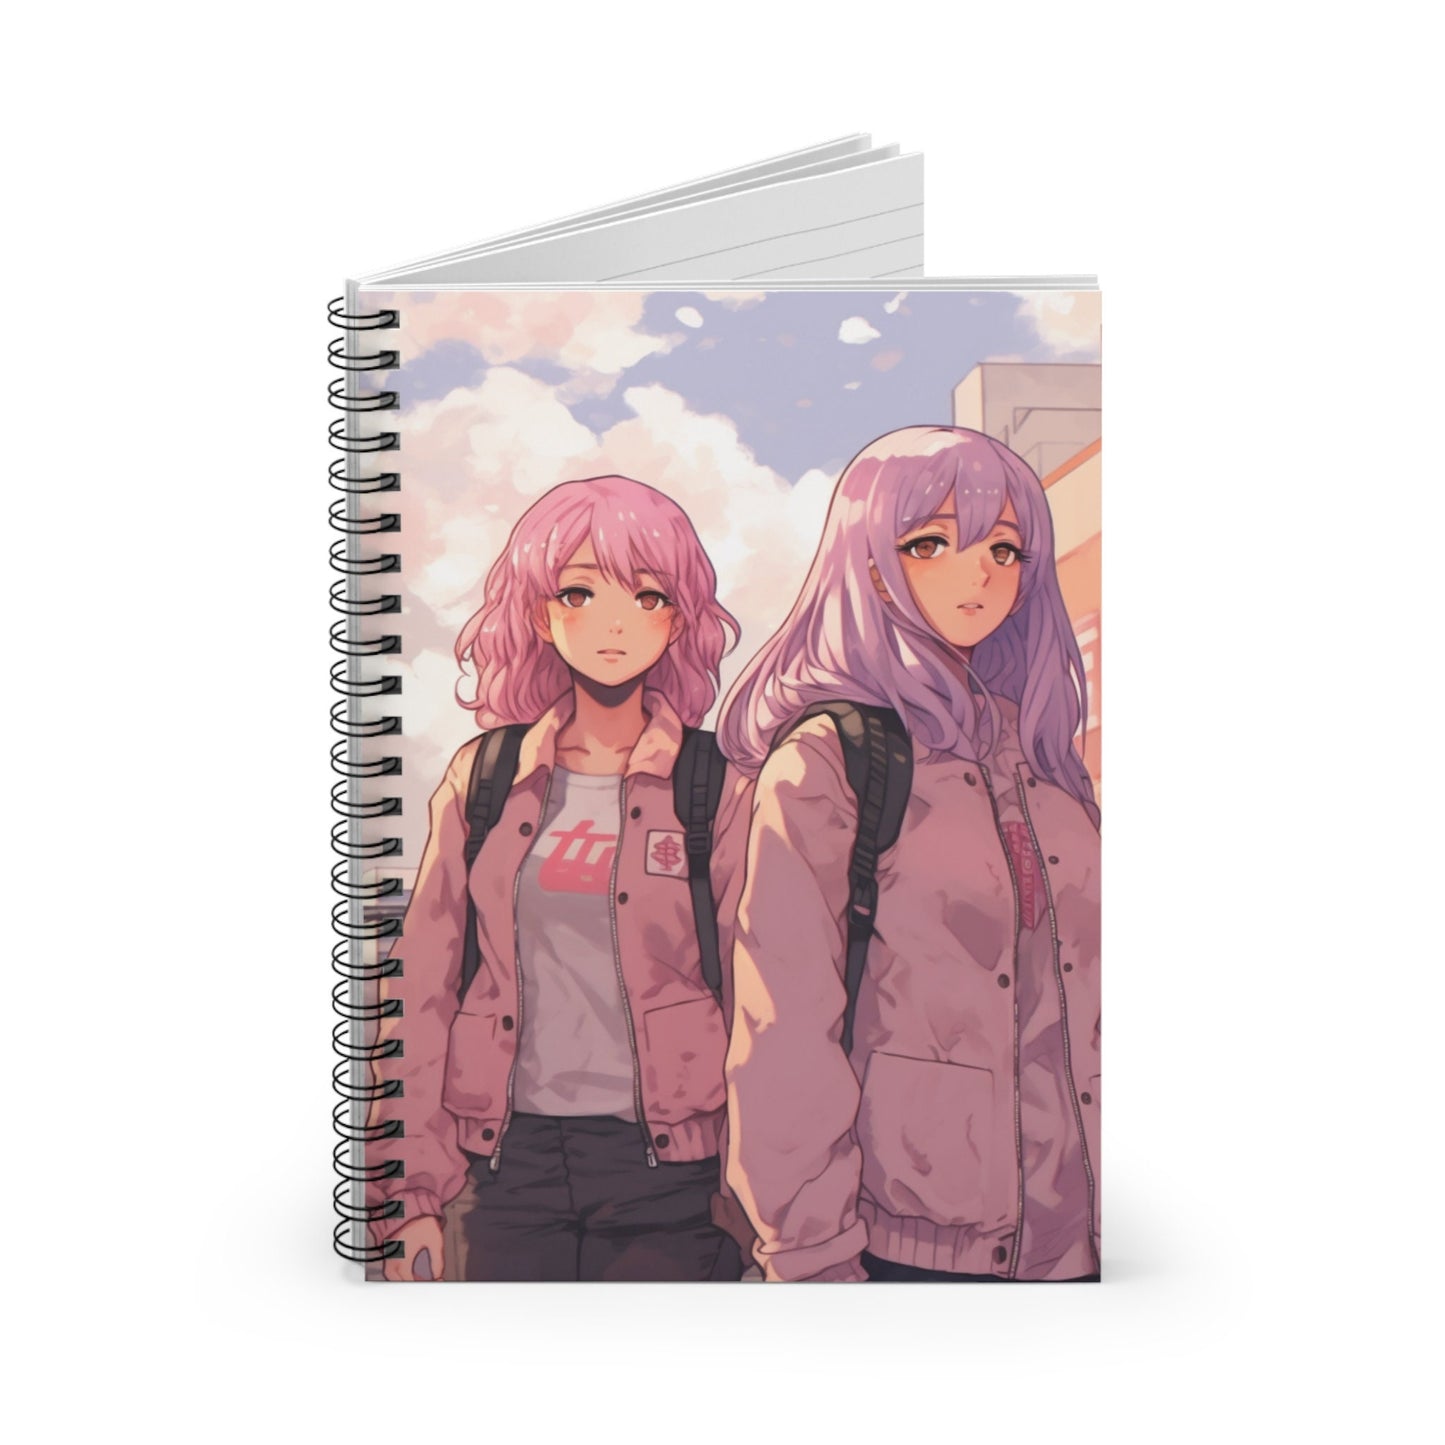 Kawaii Anime Girls Spiral Notebook Ruled Lines Journal Notebook Stationary Gift Durable Cover 6x8 Inches